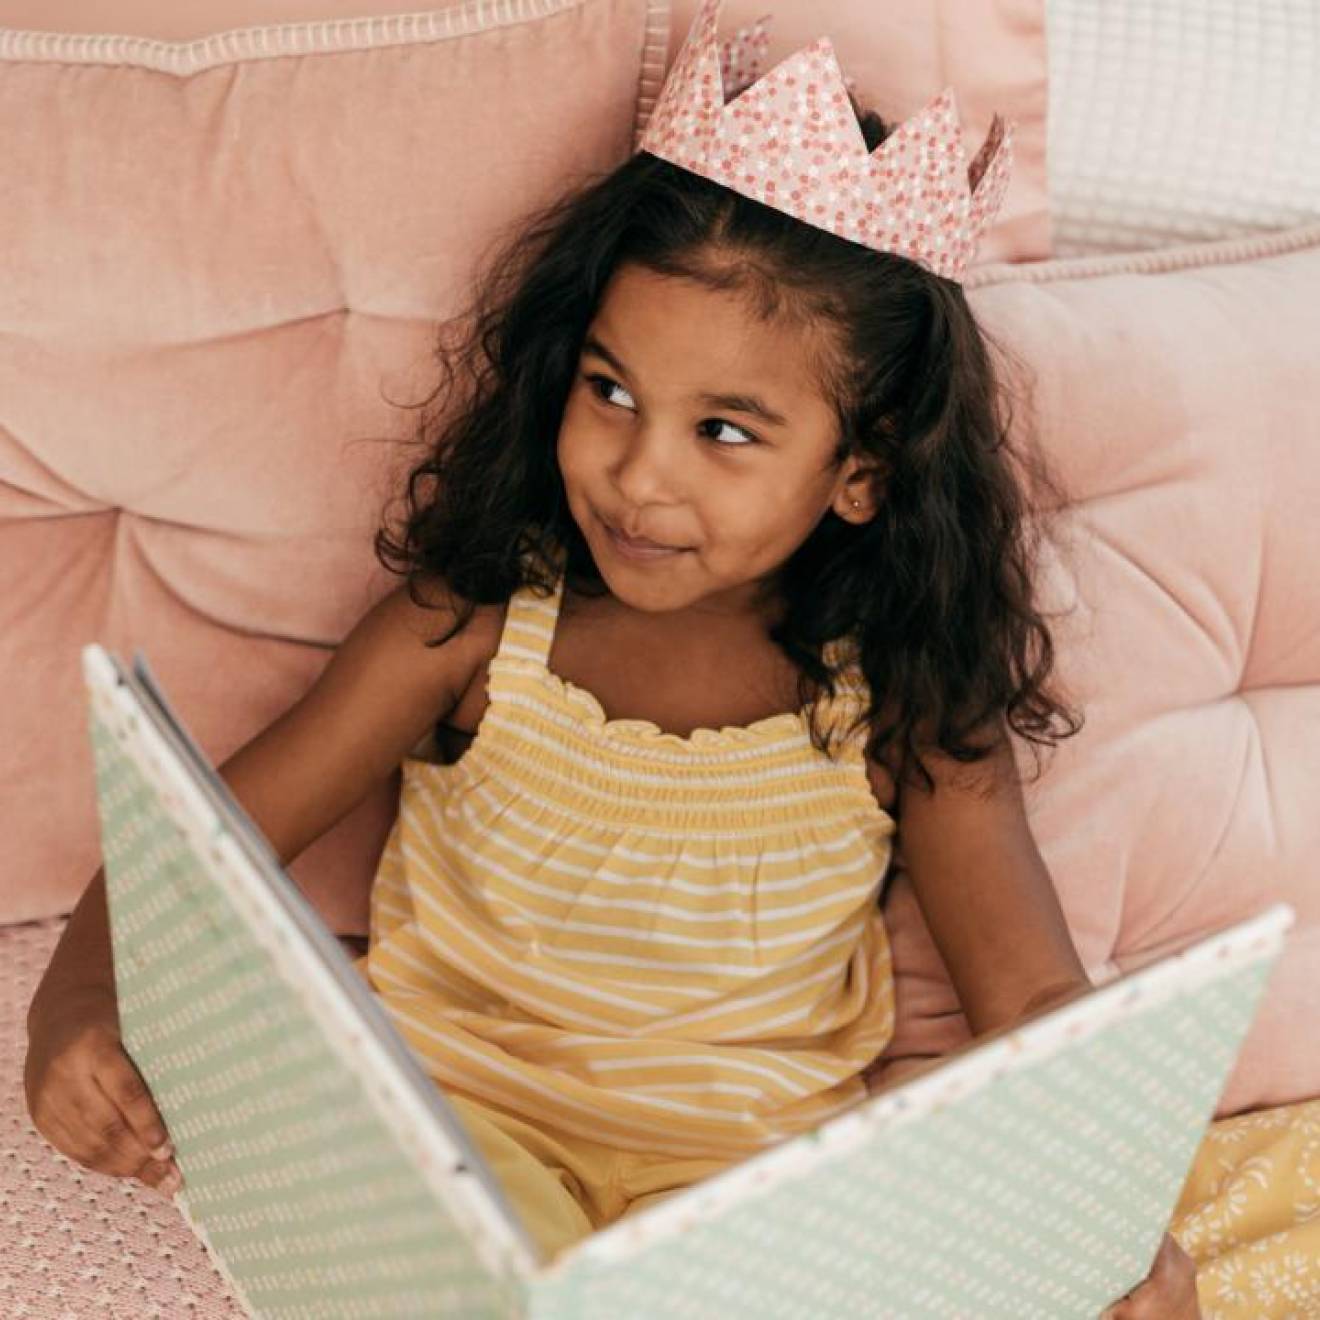 A young South Asian girl reads a book while wearing a crown and smiles